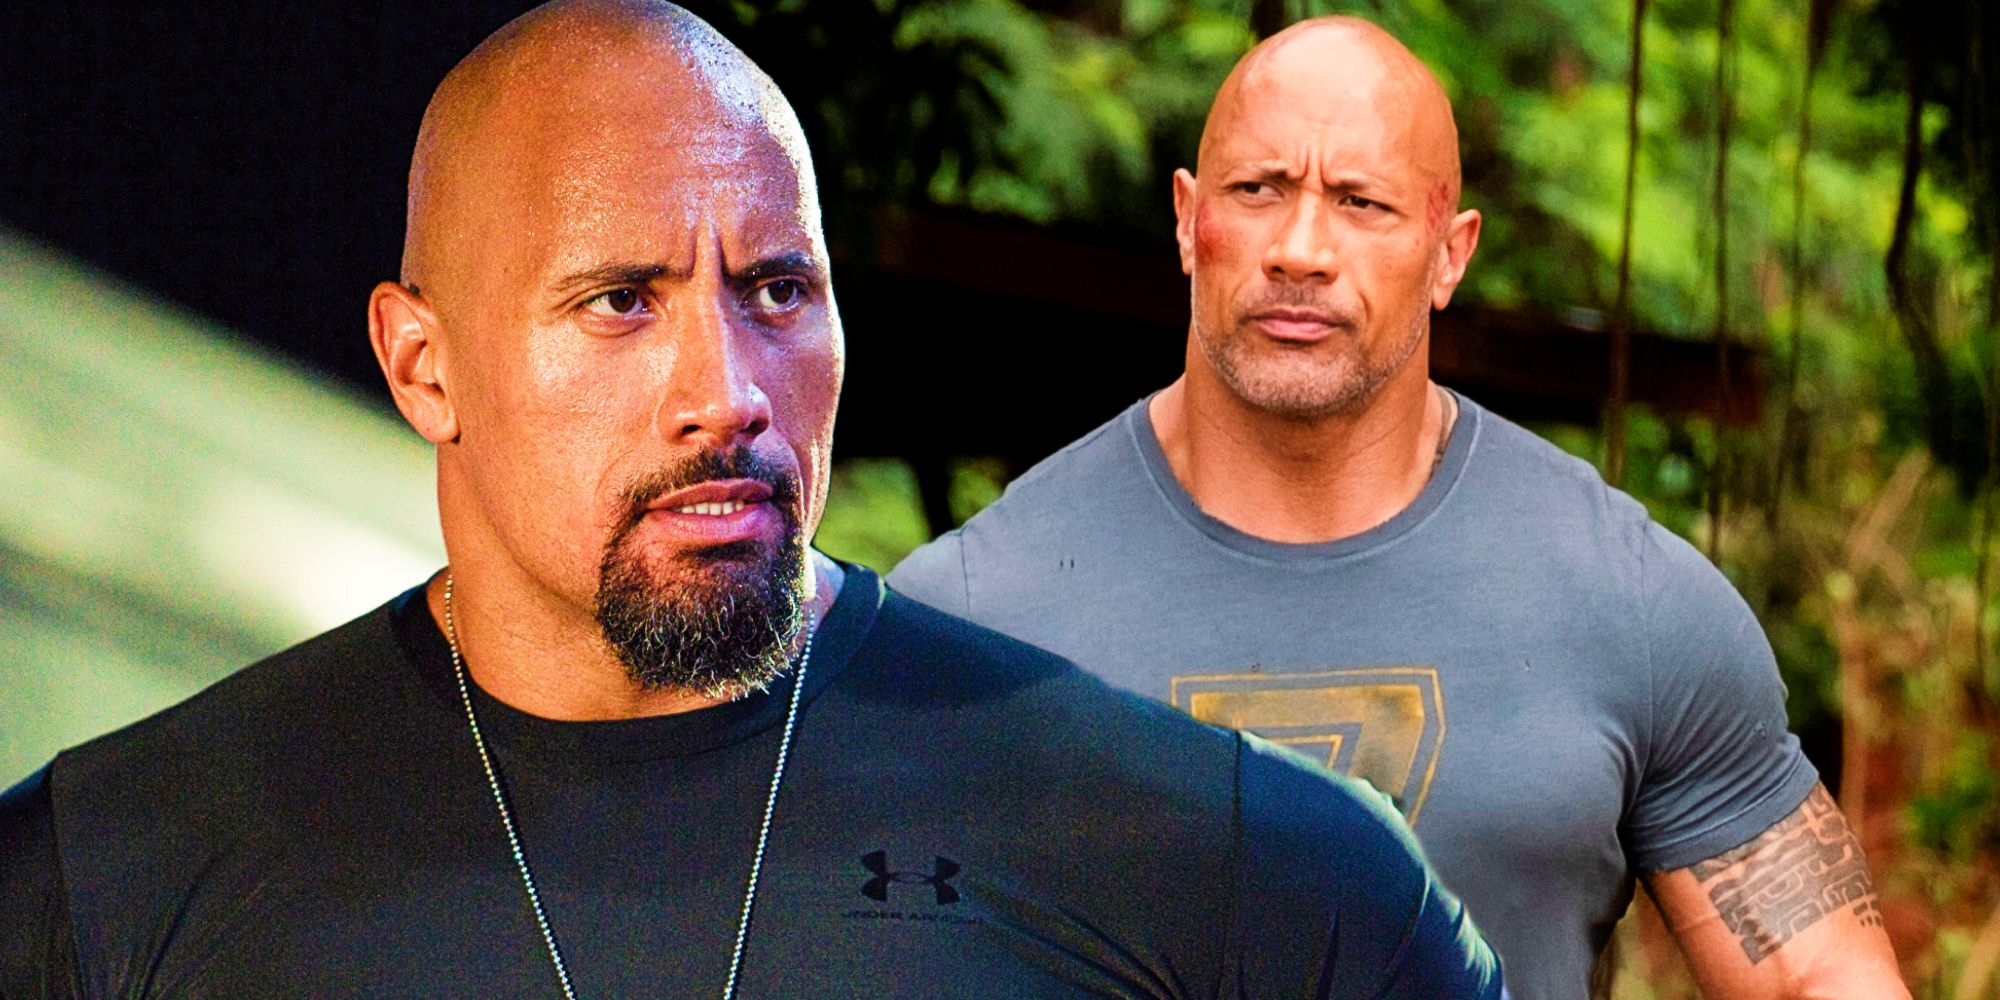 Dwayne Johnson as Hobbs in Fast Five and Furious 7